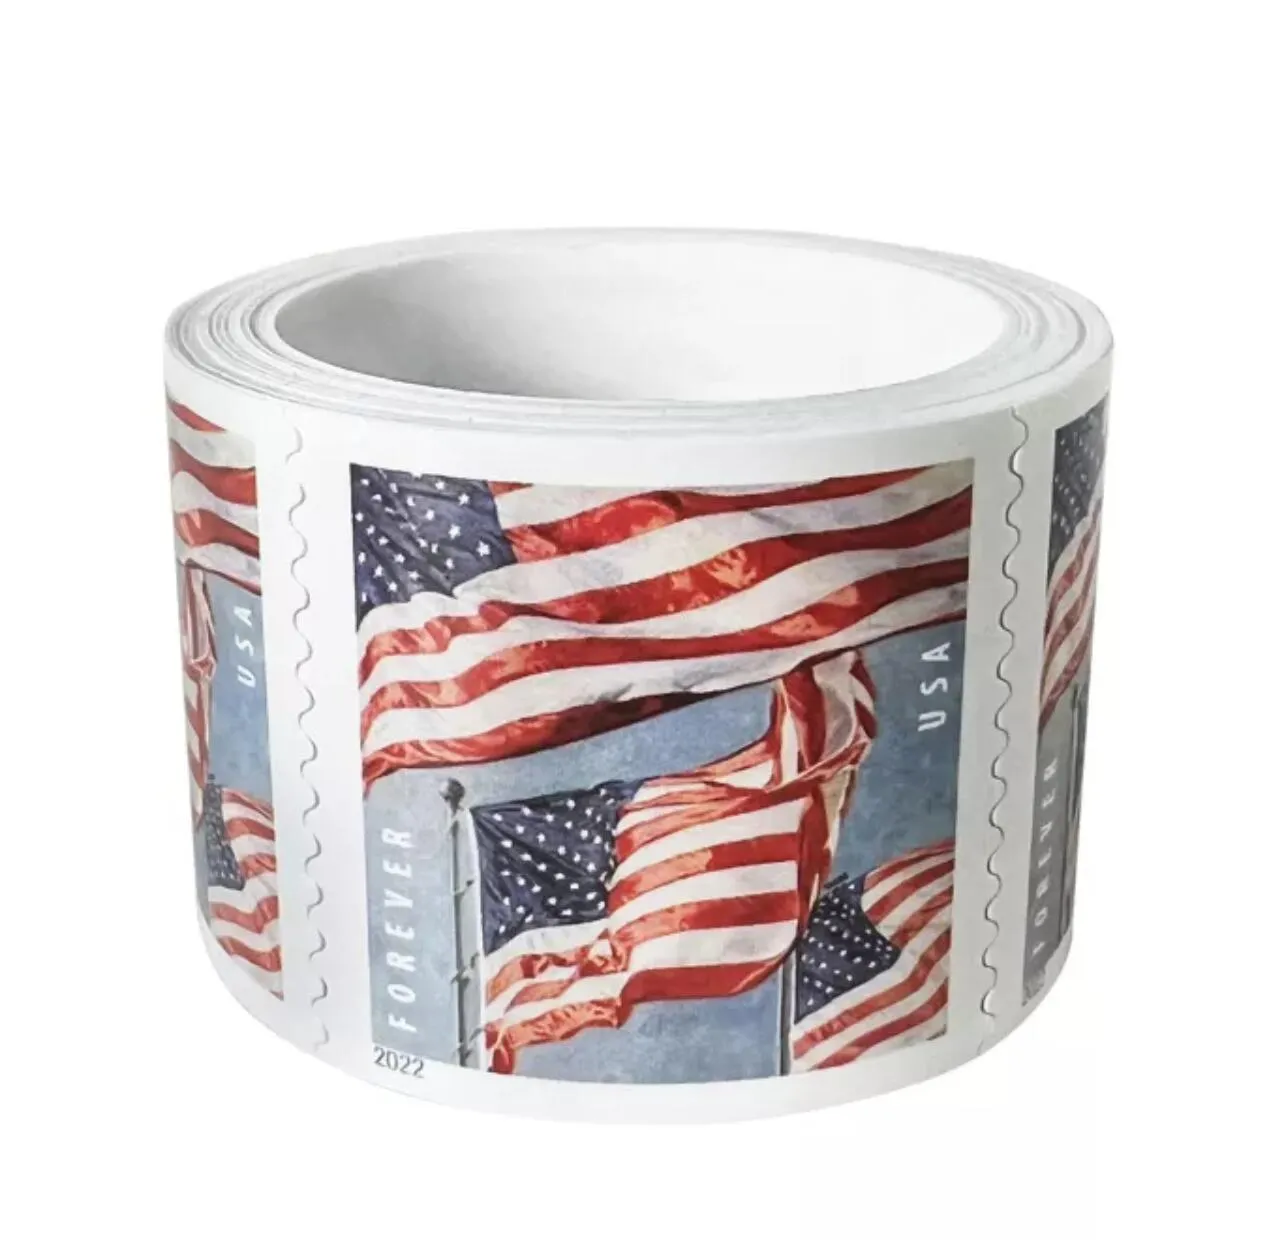 2022 US Flag First Class Mail Roll for Envelopes Letters Postcard Office Mailing Suppliesカード記念日誕生日結婚式のお祝い